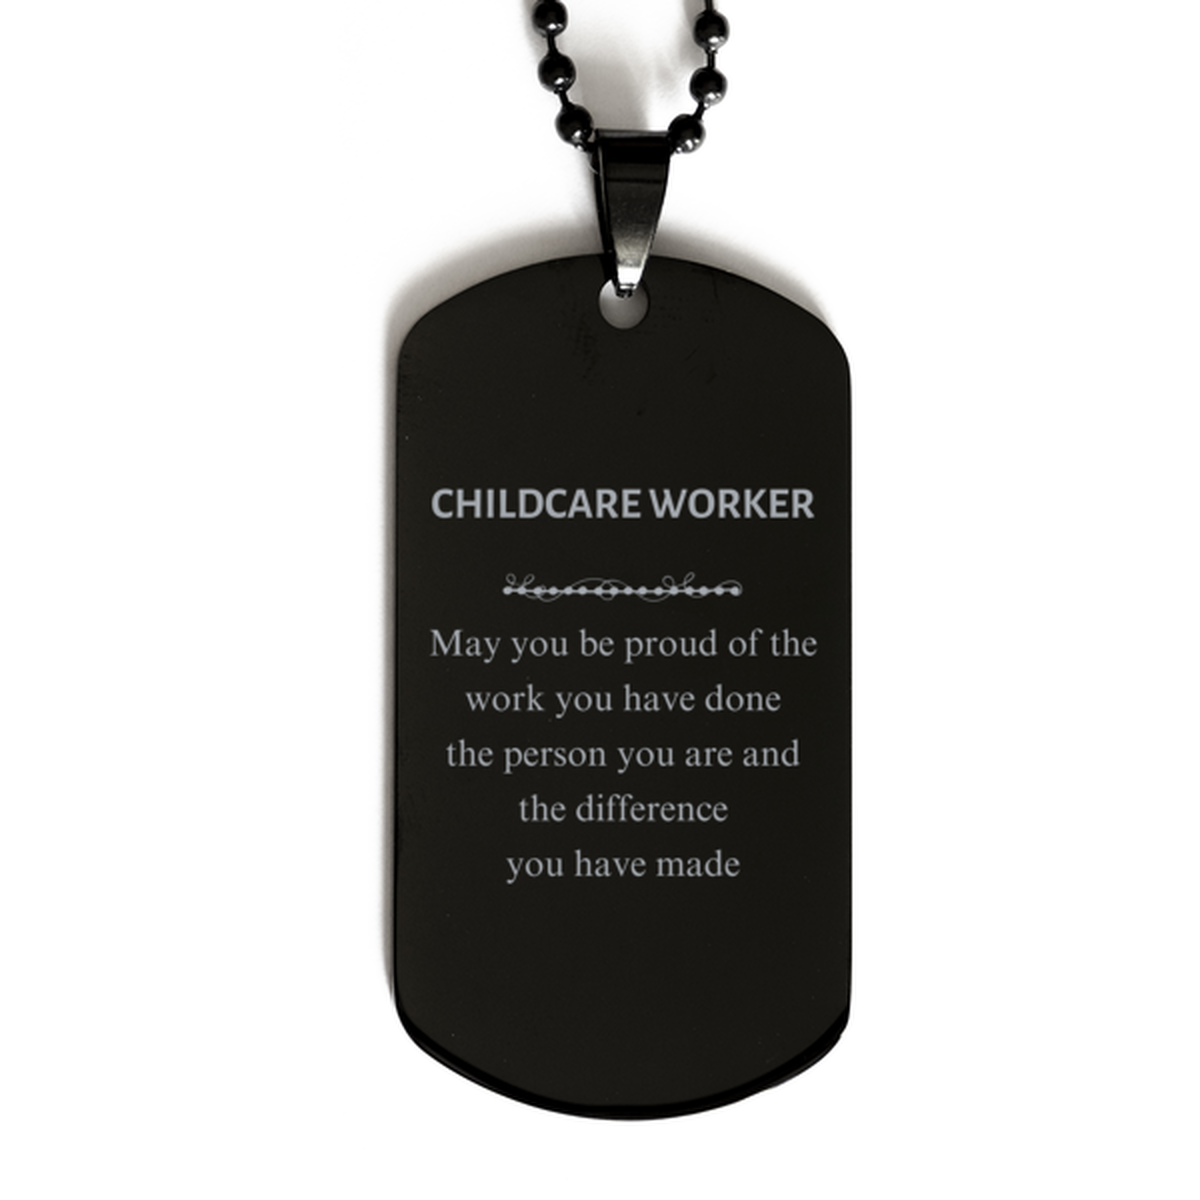 Childcare Worker May you be proud of the work you have done, Retirement Childcare Worker Black Dog Tag for Colleague Appreciation Gifts Amazing for Childcare Worker